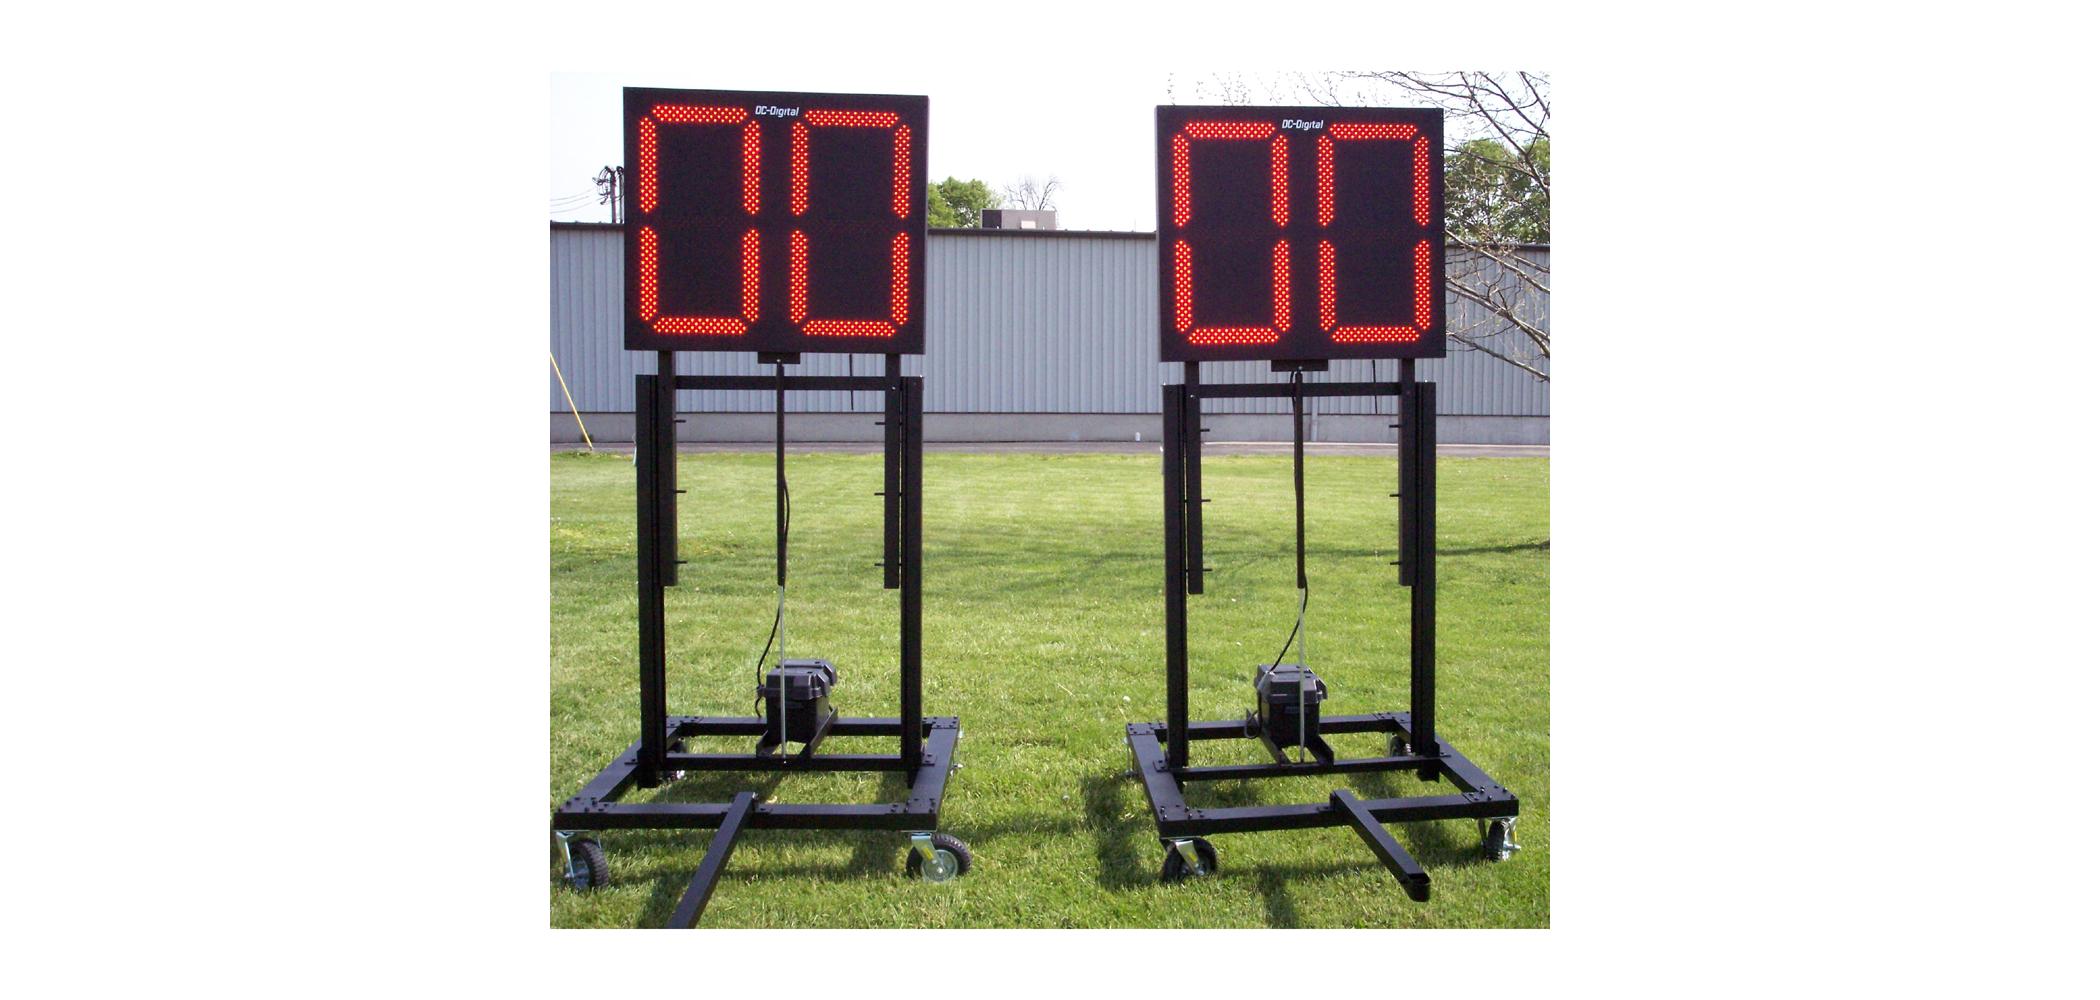 Football delay of game timers portable, battery operated, wireless